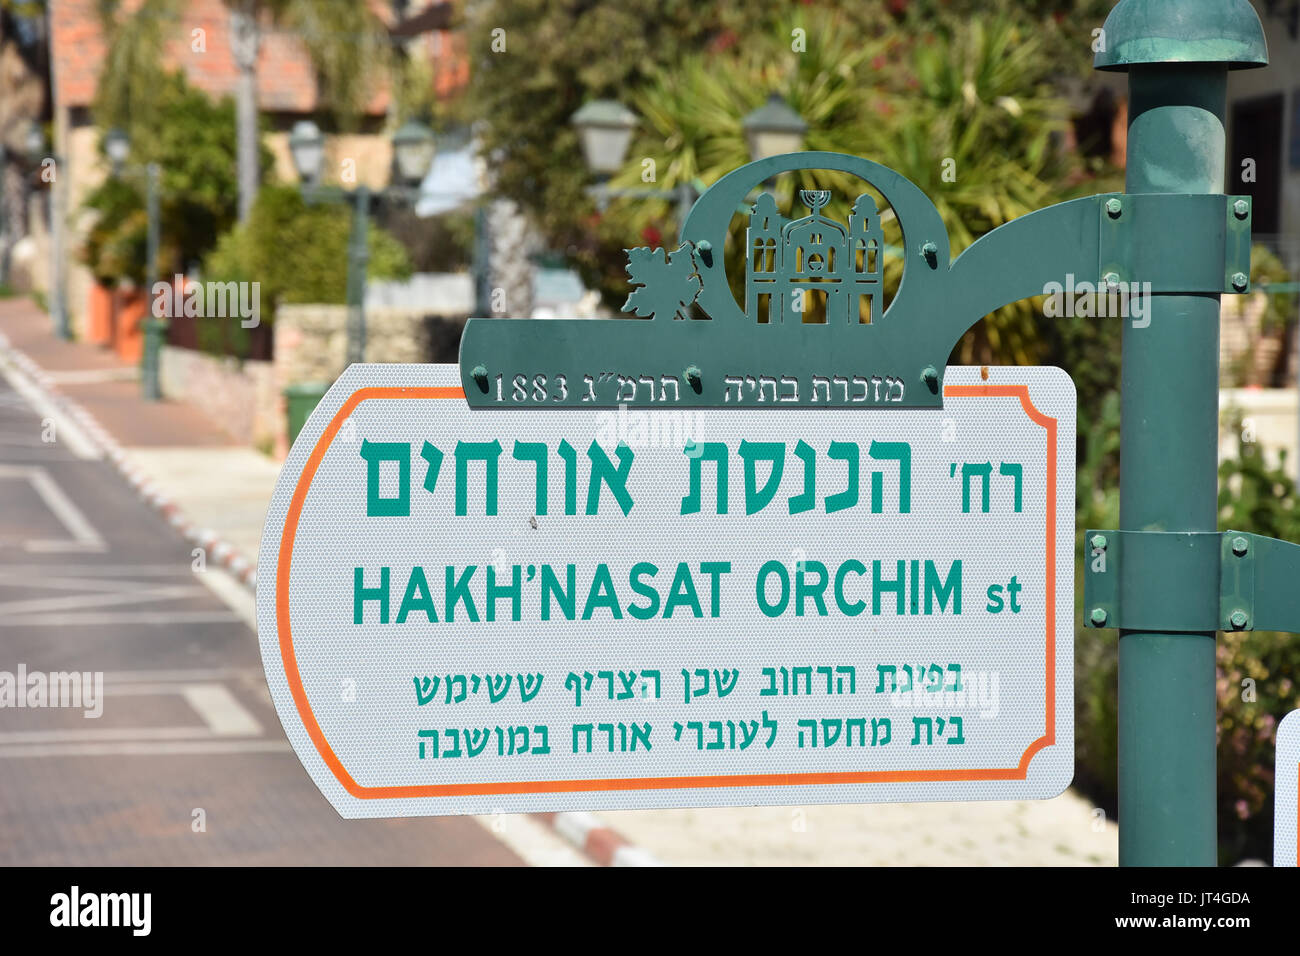 Street sign post in Israel Stock Photo